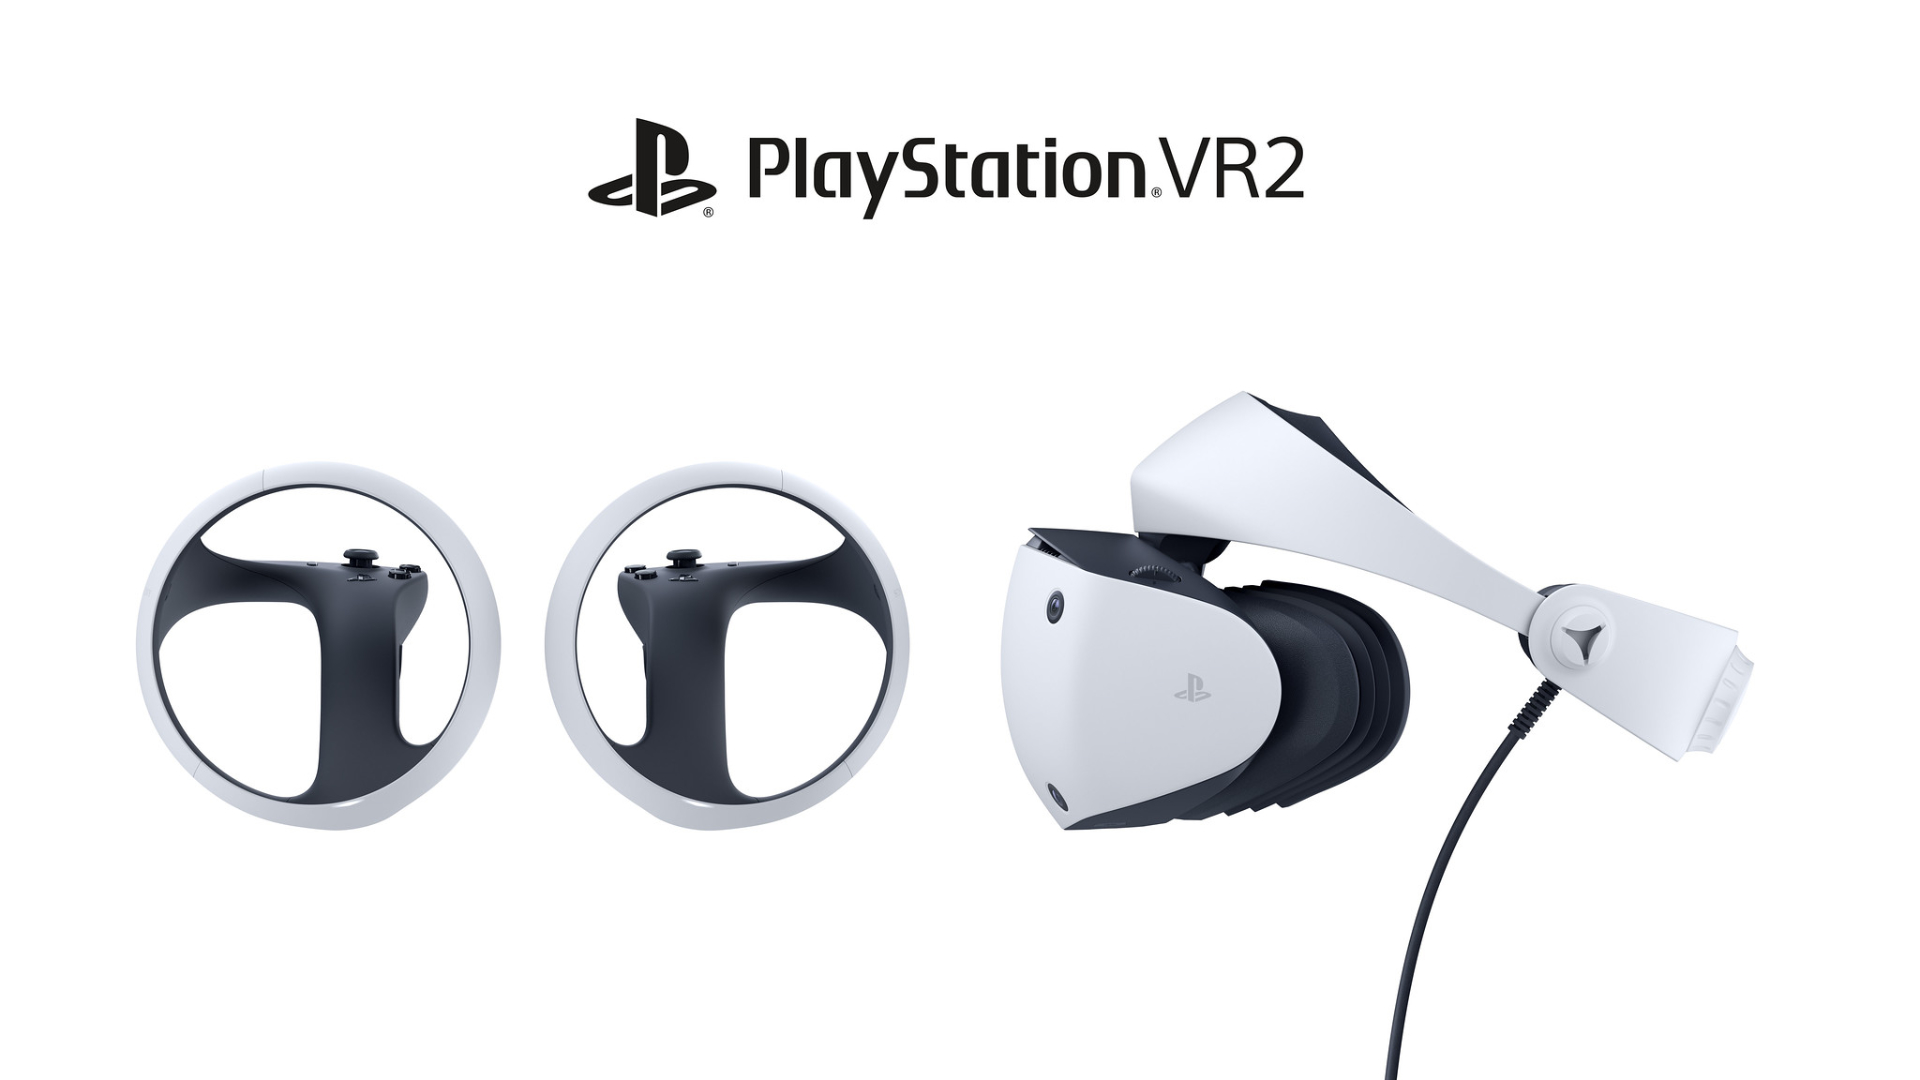 Sony Shows Off Design For Playstation VR2 Headset screenshot 1